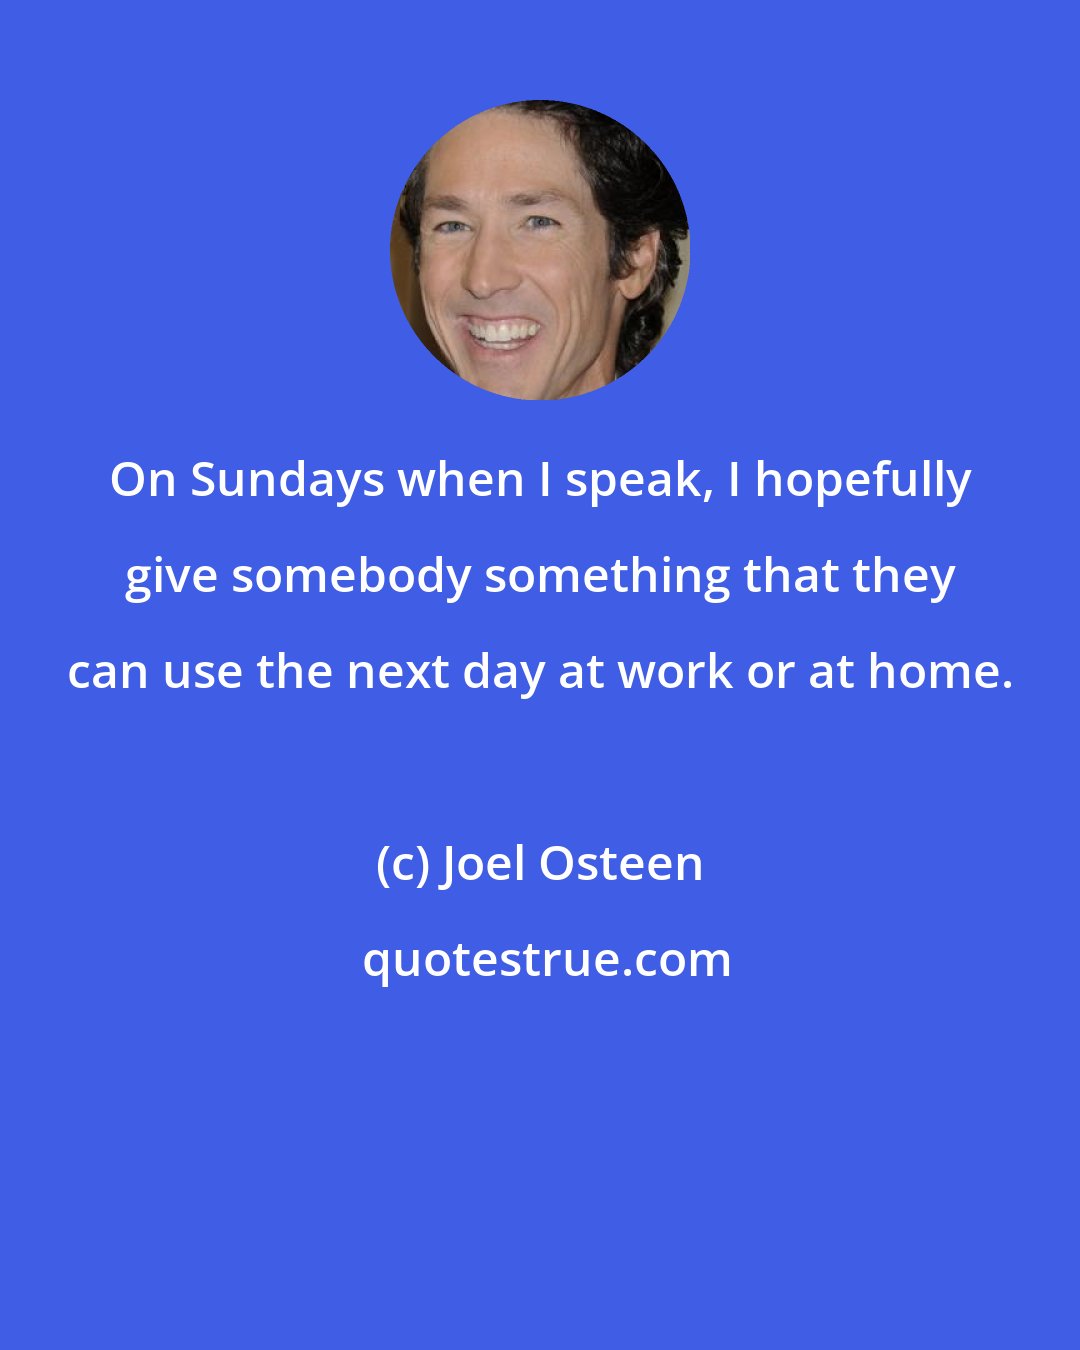 Joel Osteen: On Sundays when I speak, I hopefully give somebody something that they can use the next day at work or at home.